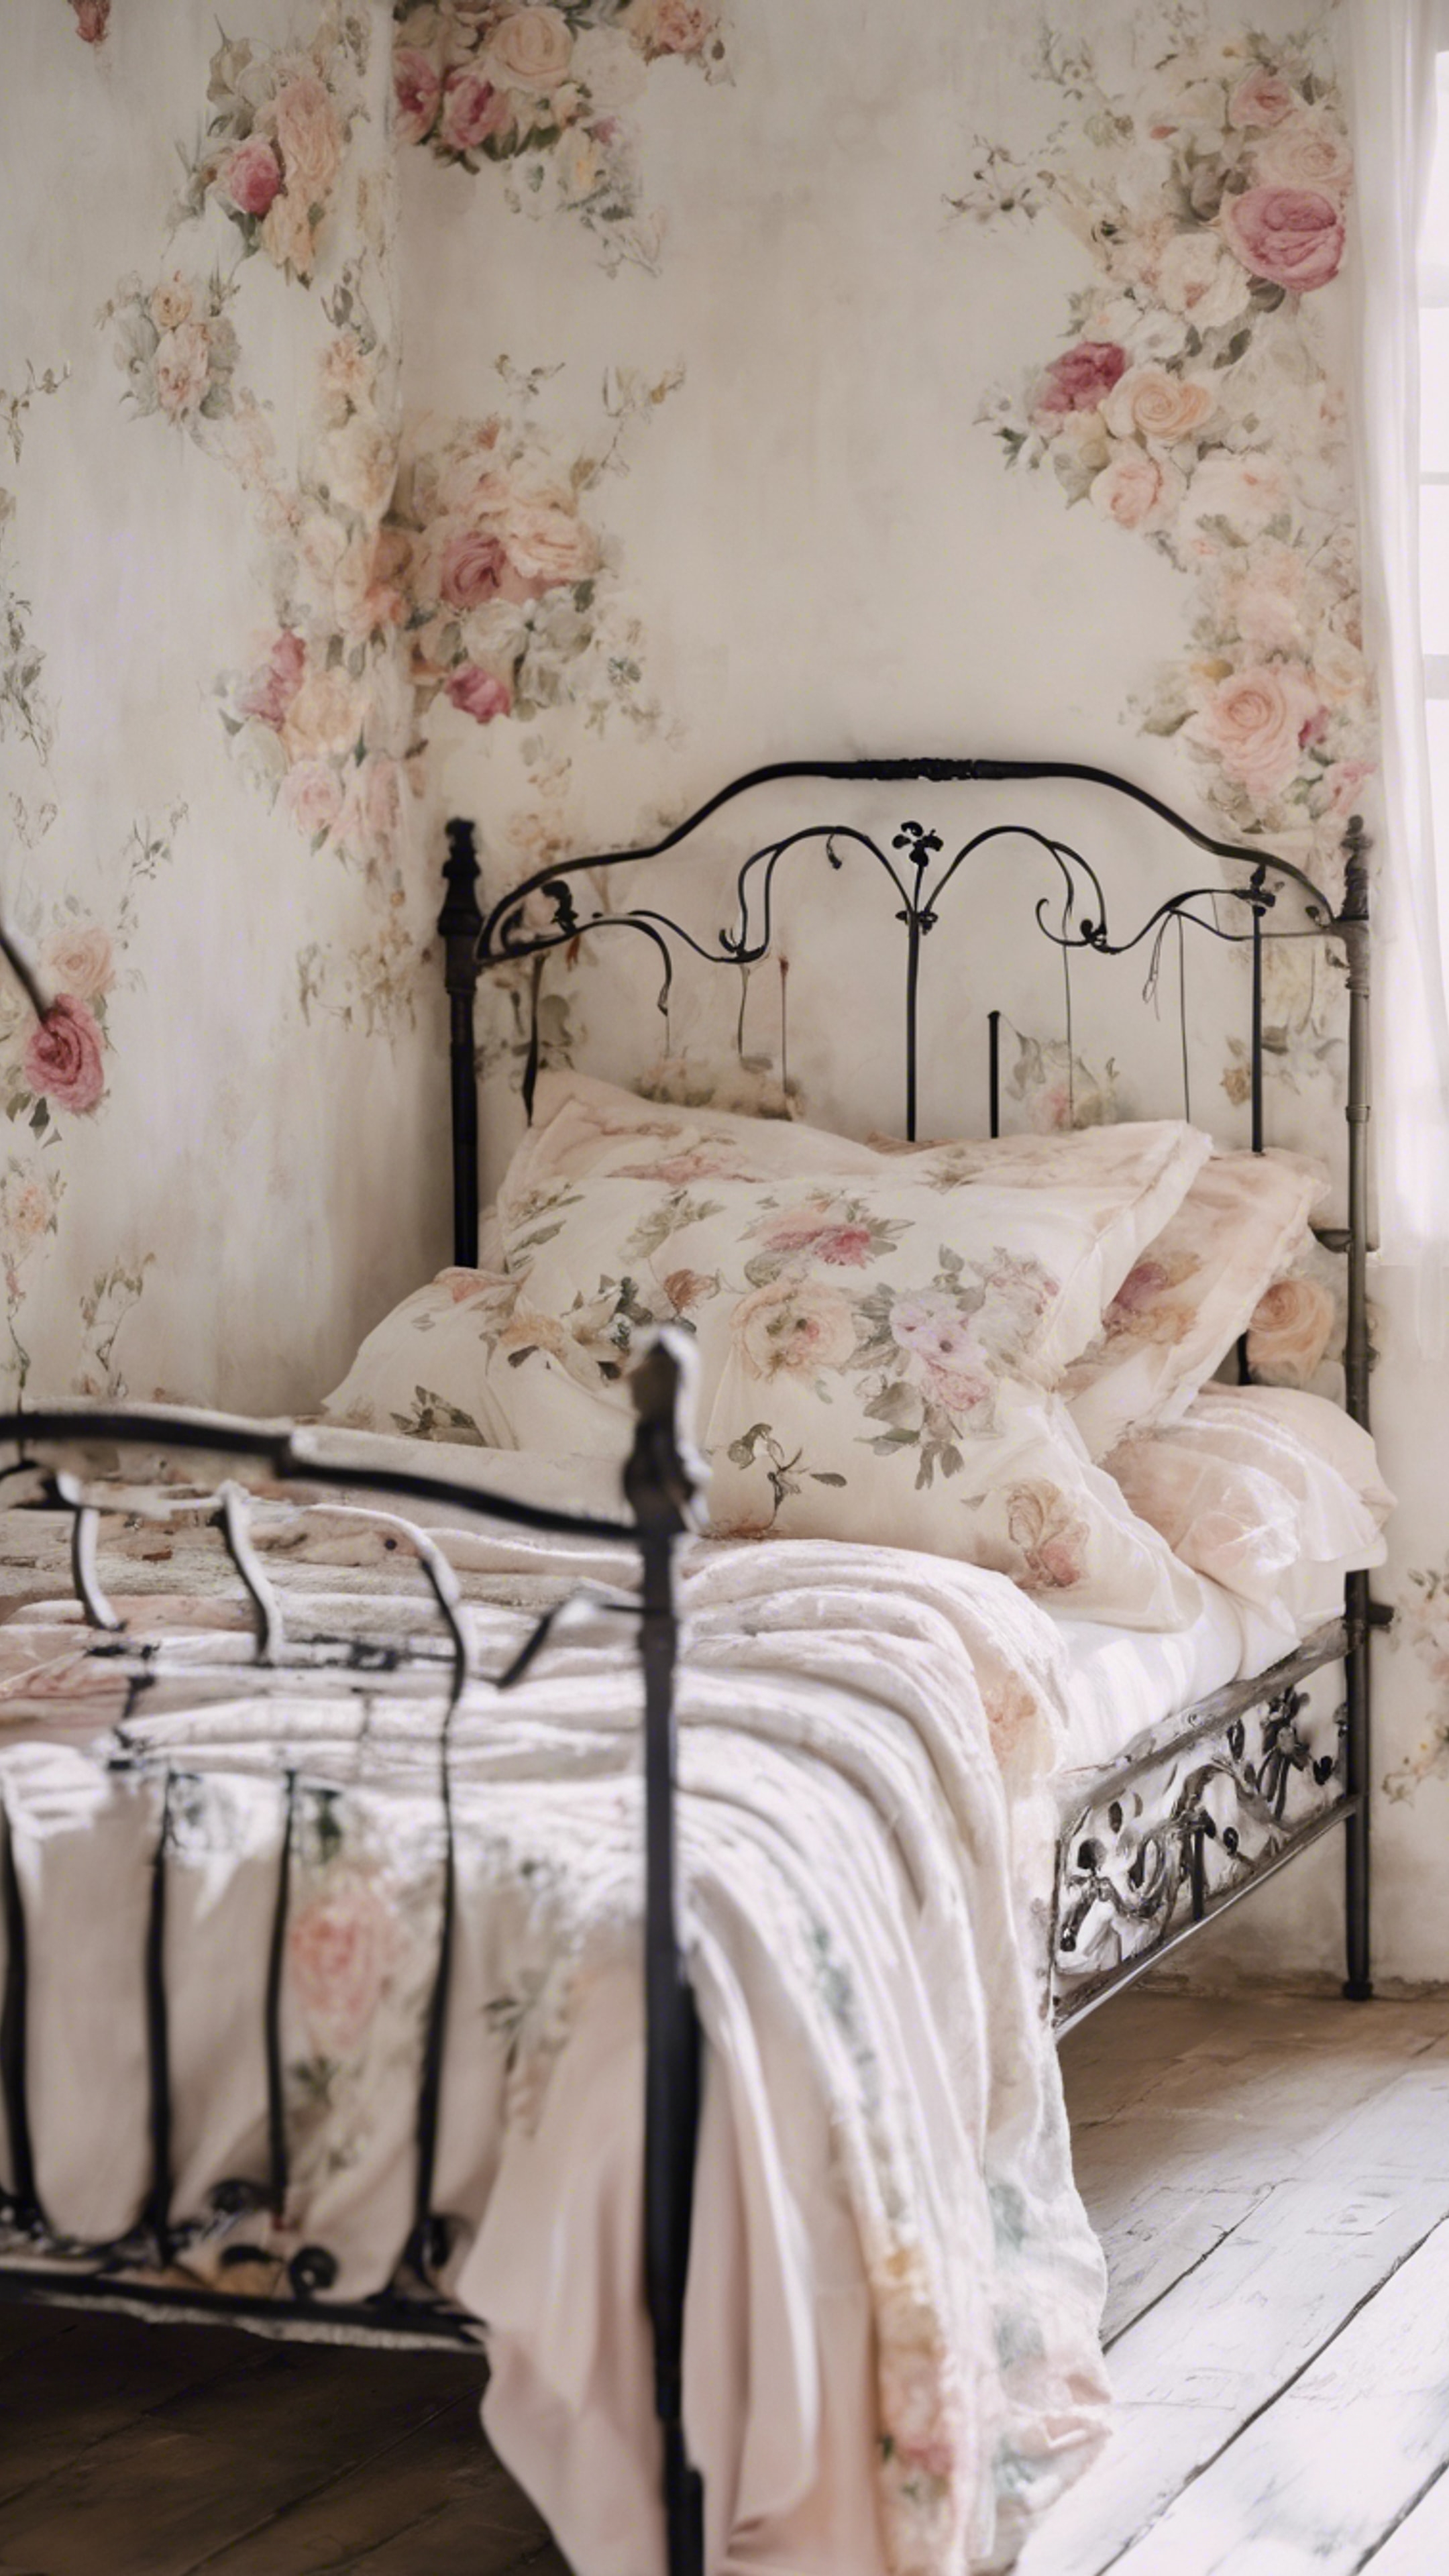 A French country bedroom featuring a wrought-iron bed and pastel floral patterns against whitewashed walls. Fond d'écran[80b94b8799dc4ca6abc7]